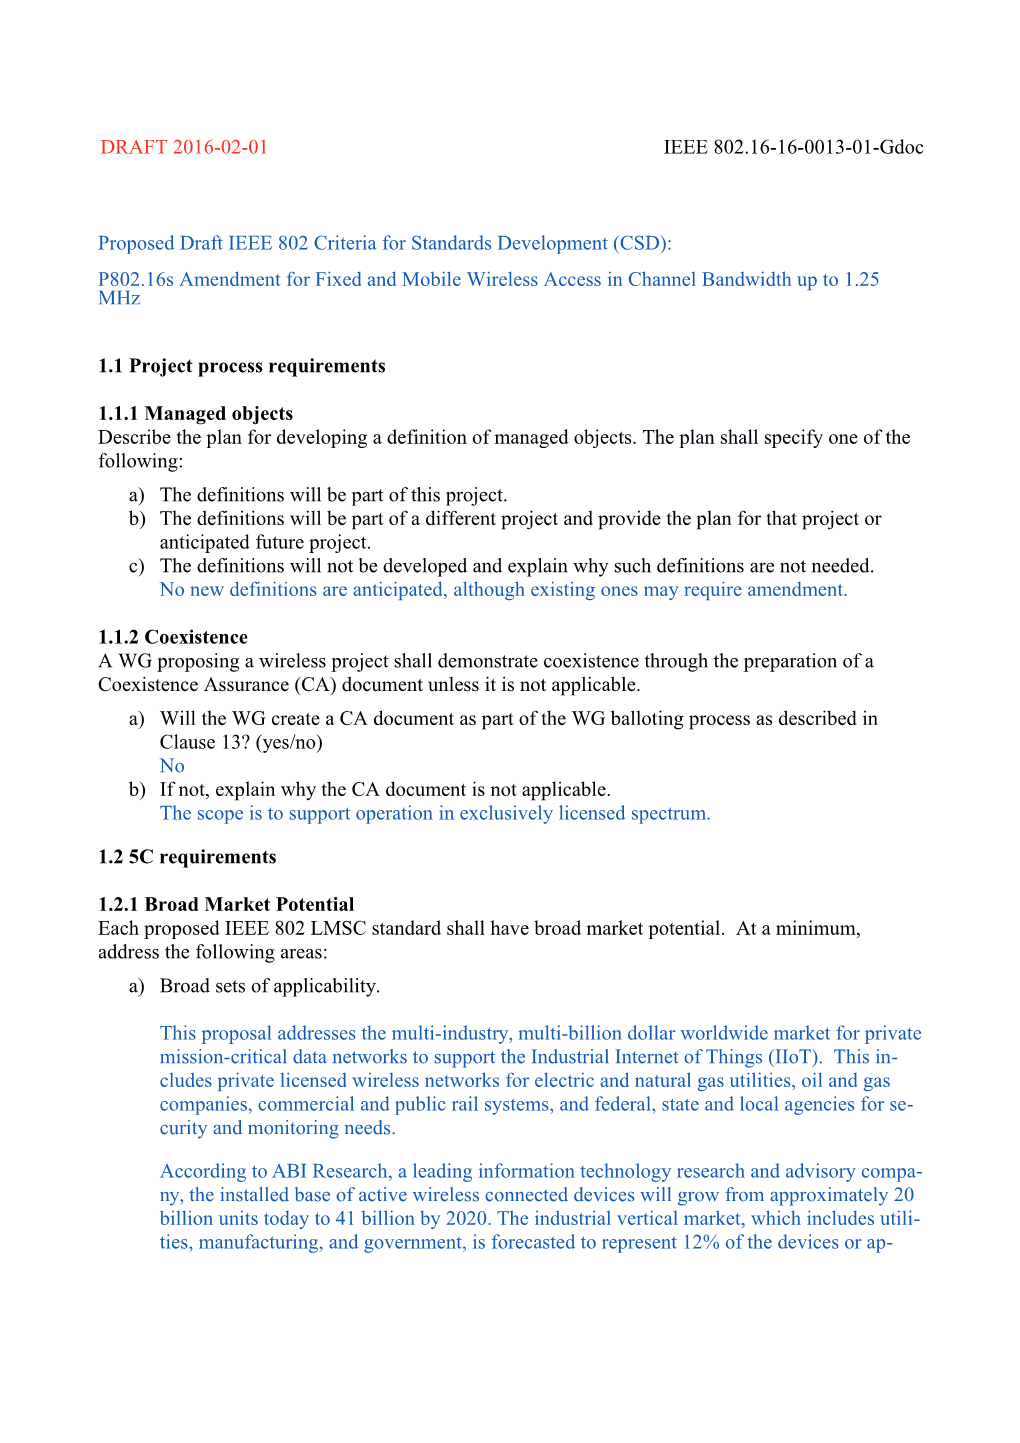 Proposed Draft IEEE 802 Criteria for Standards Development (CSD)